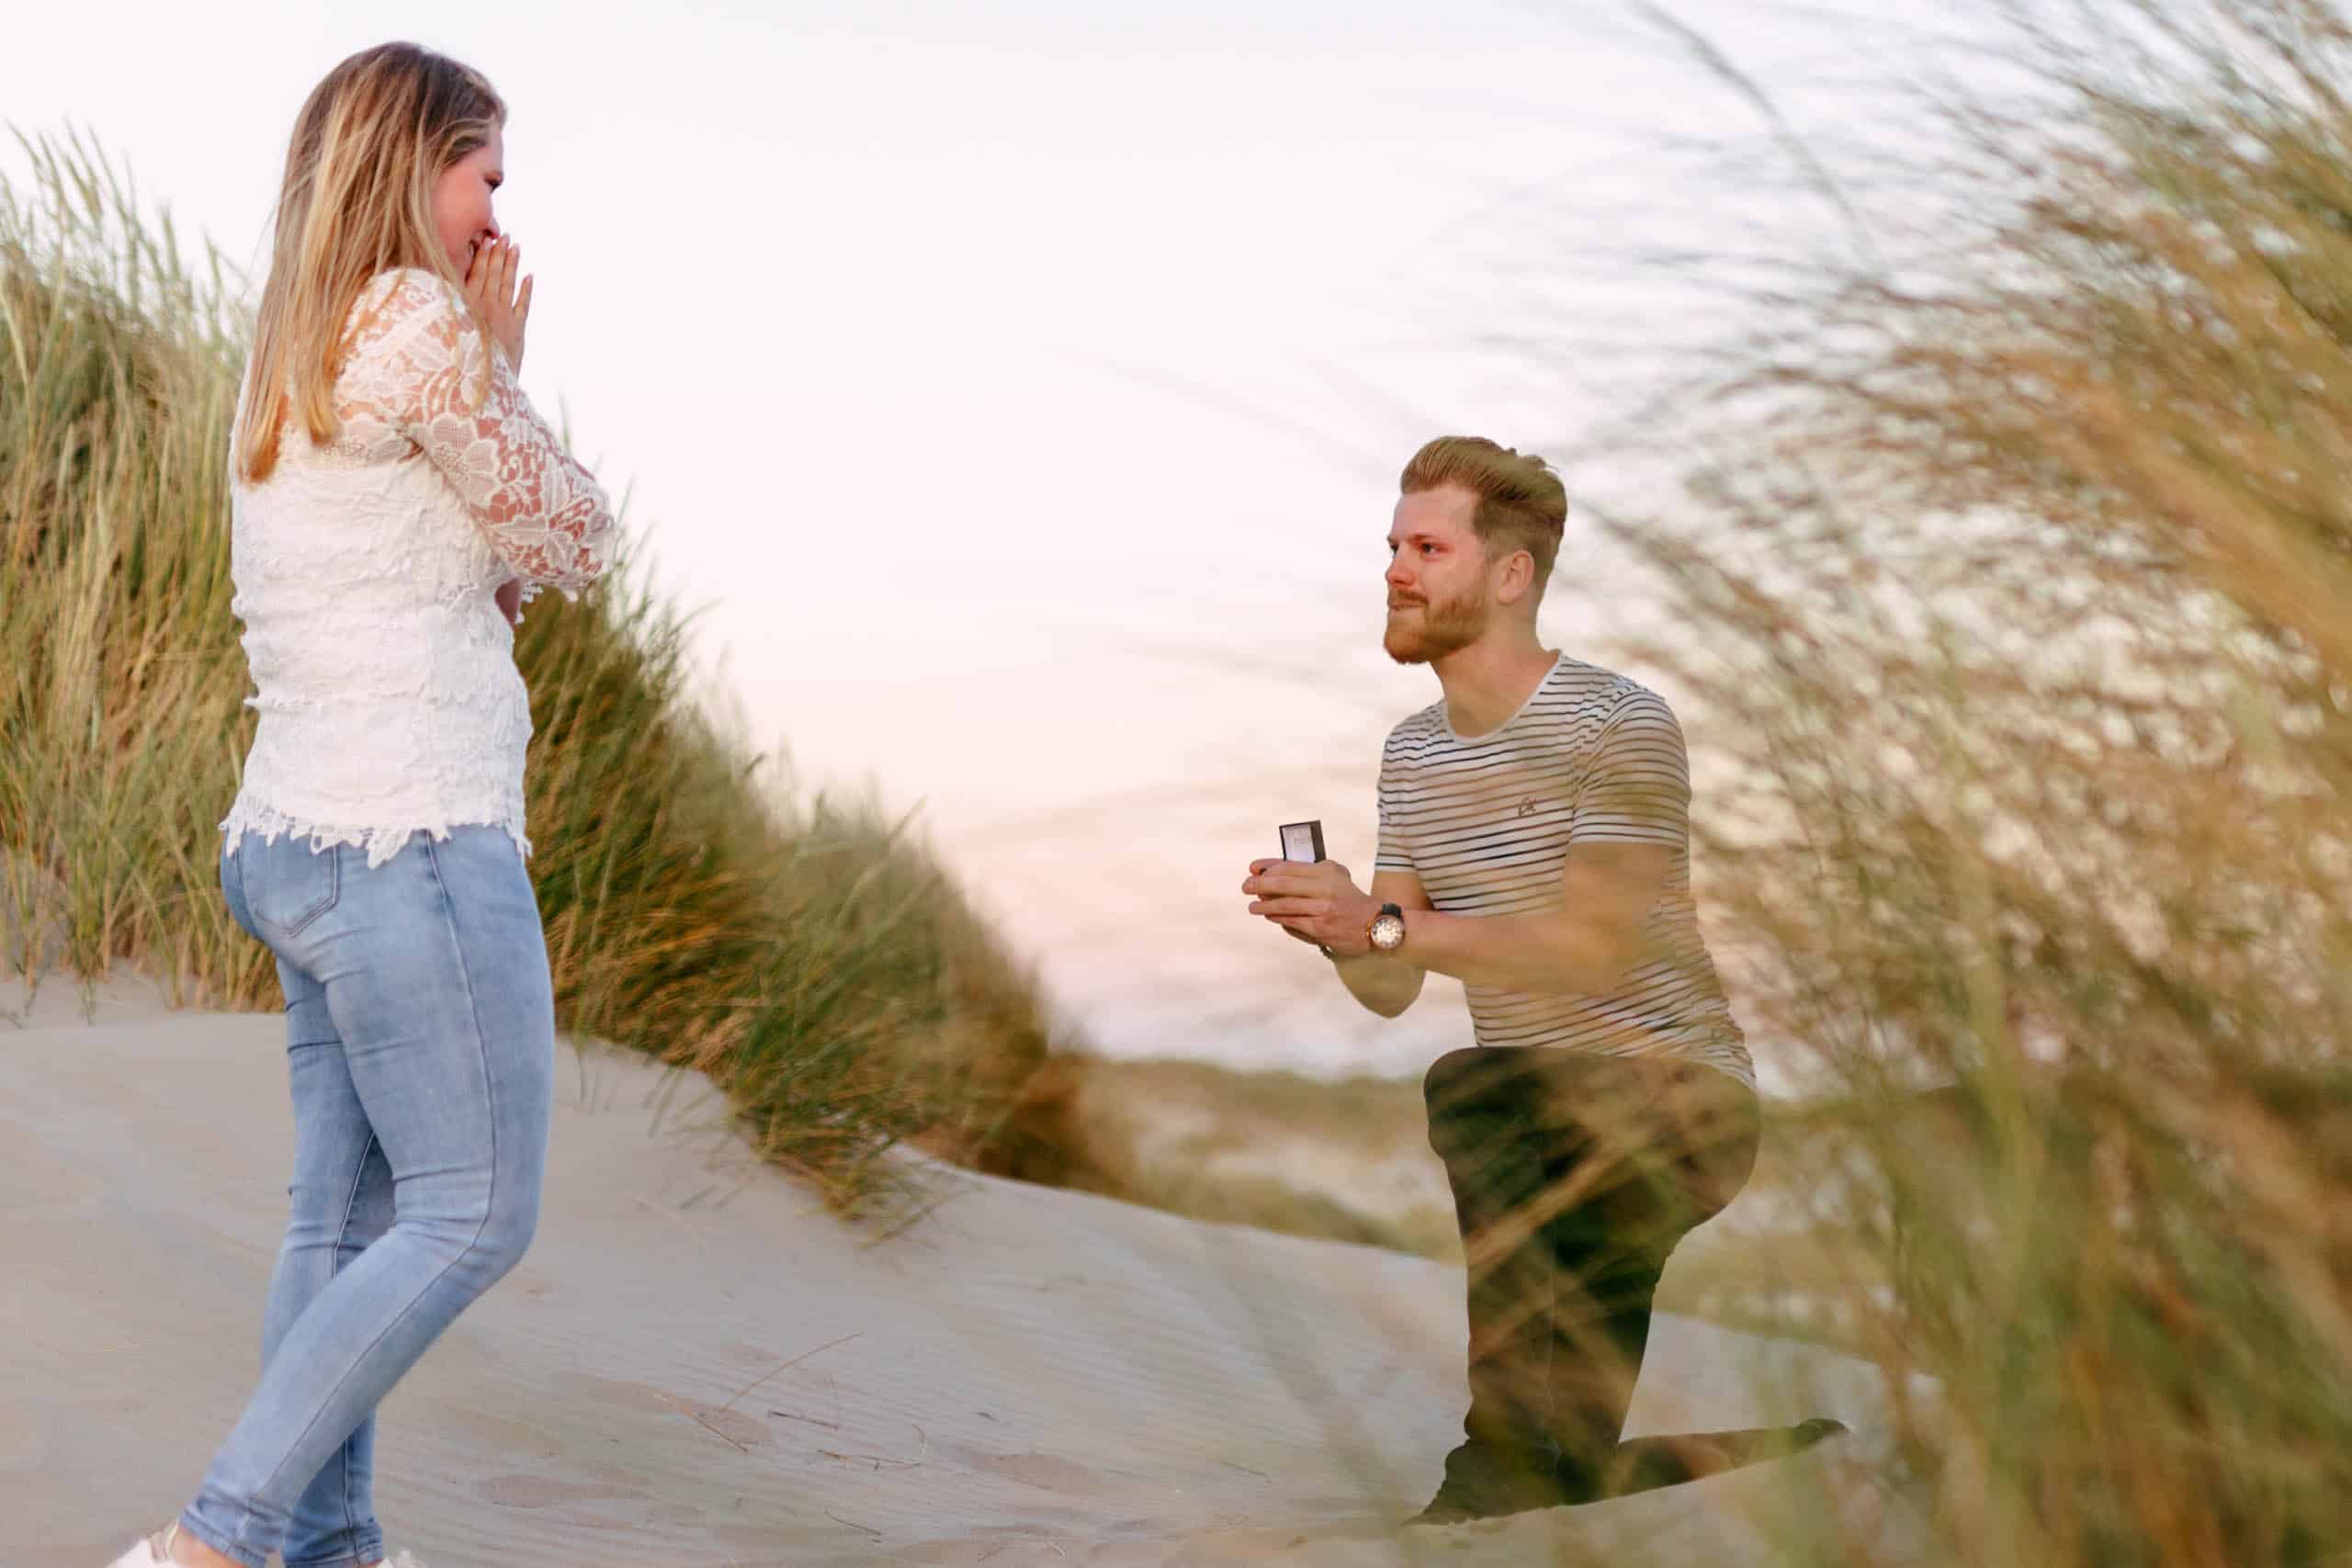 A man proposes to a woman in the sand and asks her 10 to marry him.